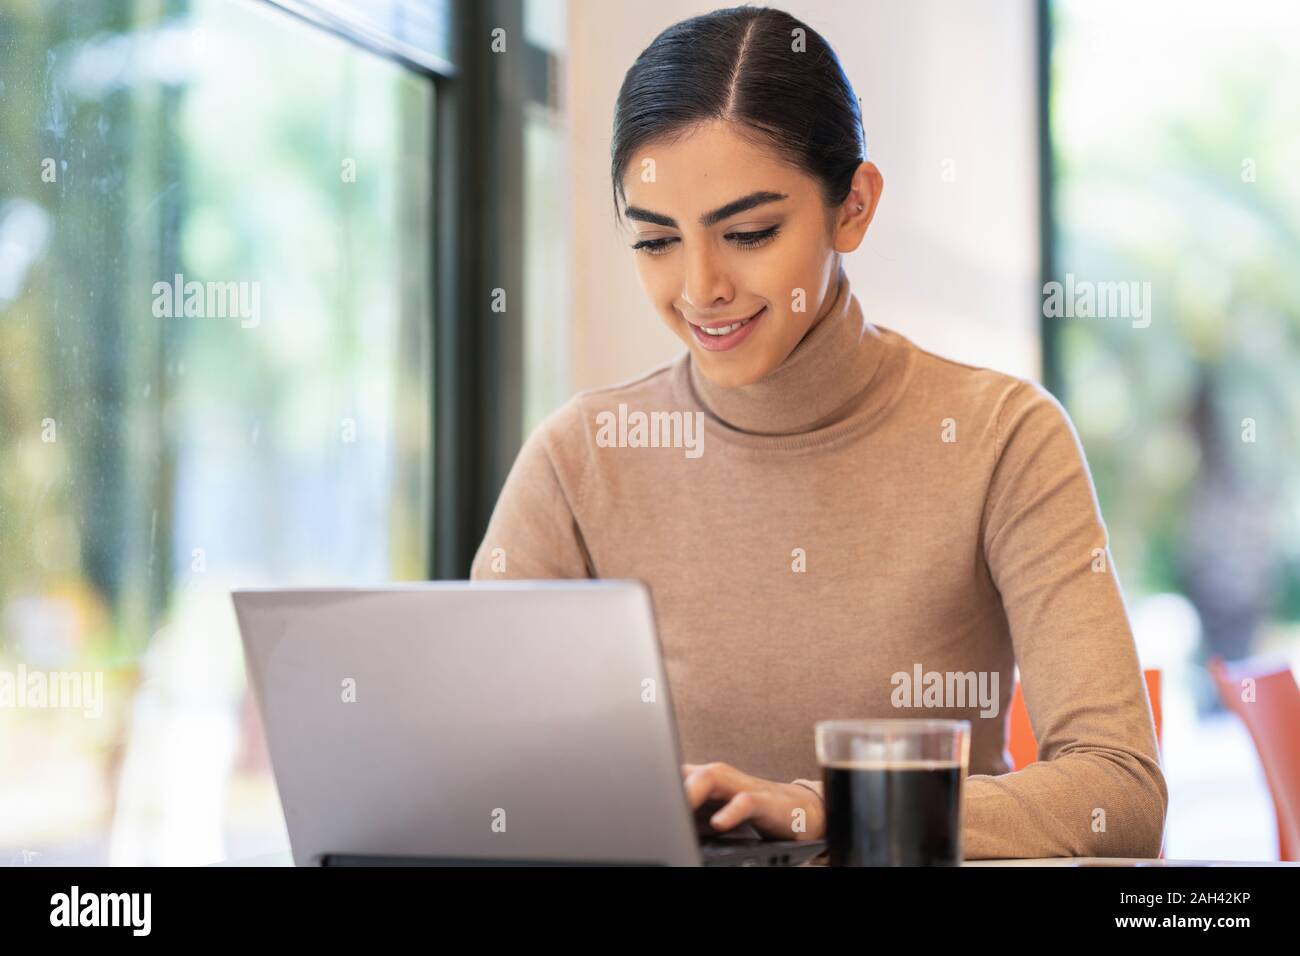 Smiling young woman using laptop in a cafe Stock Photo